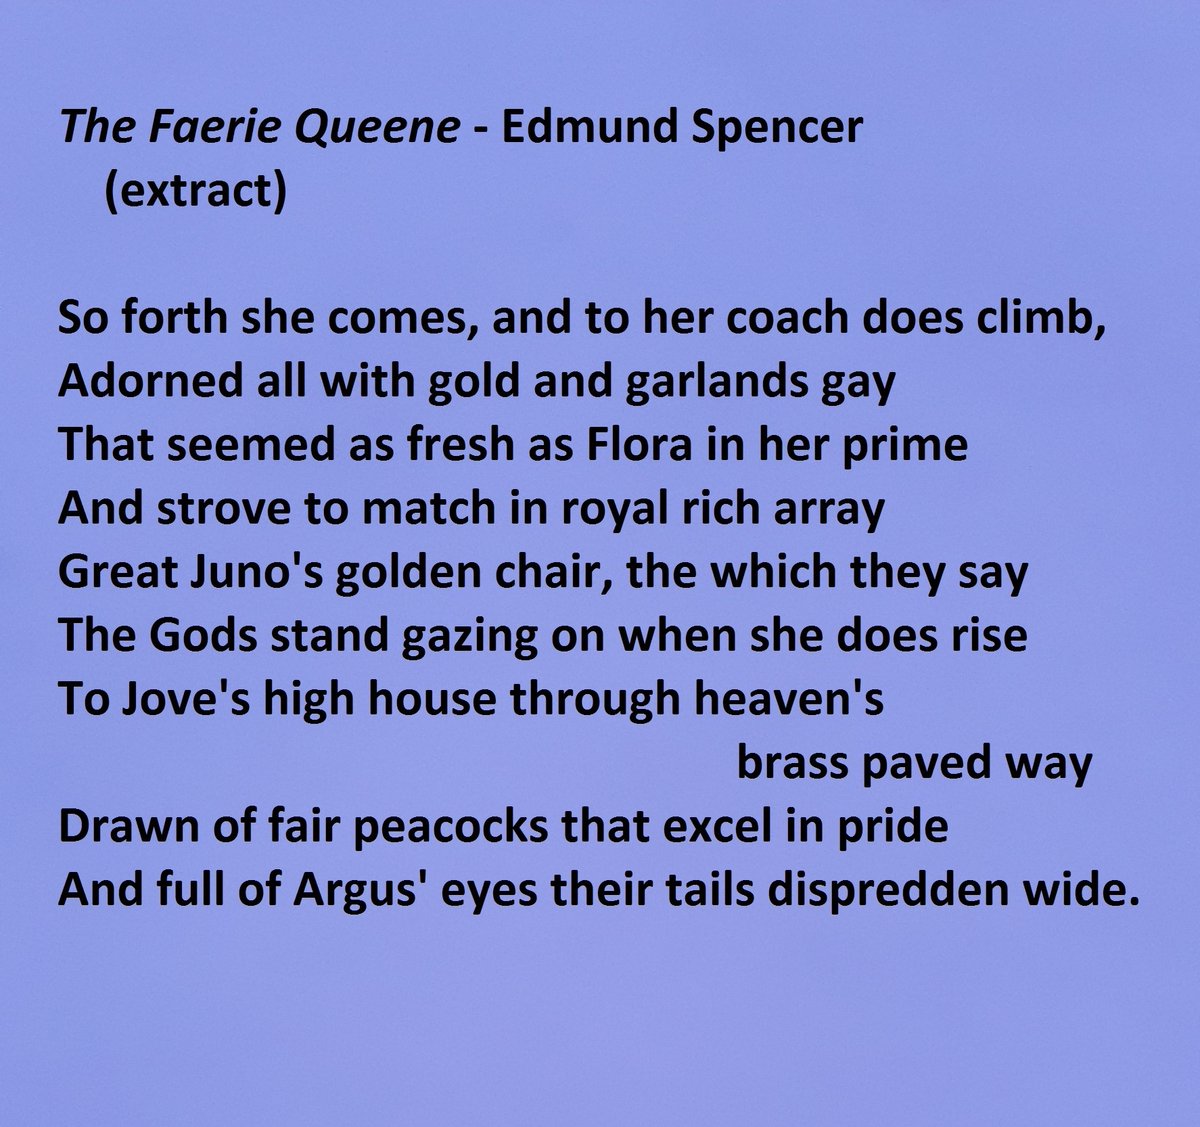 "The Fairy Queen" by Edmund Spencer - extract - beginning with "So forth she comes, and to her coach does climb"; ending with "And full of Argus' eyes their tails dispredden wide."